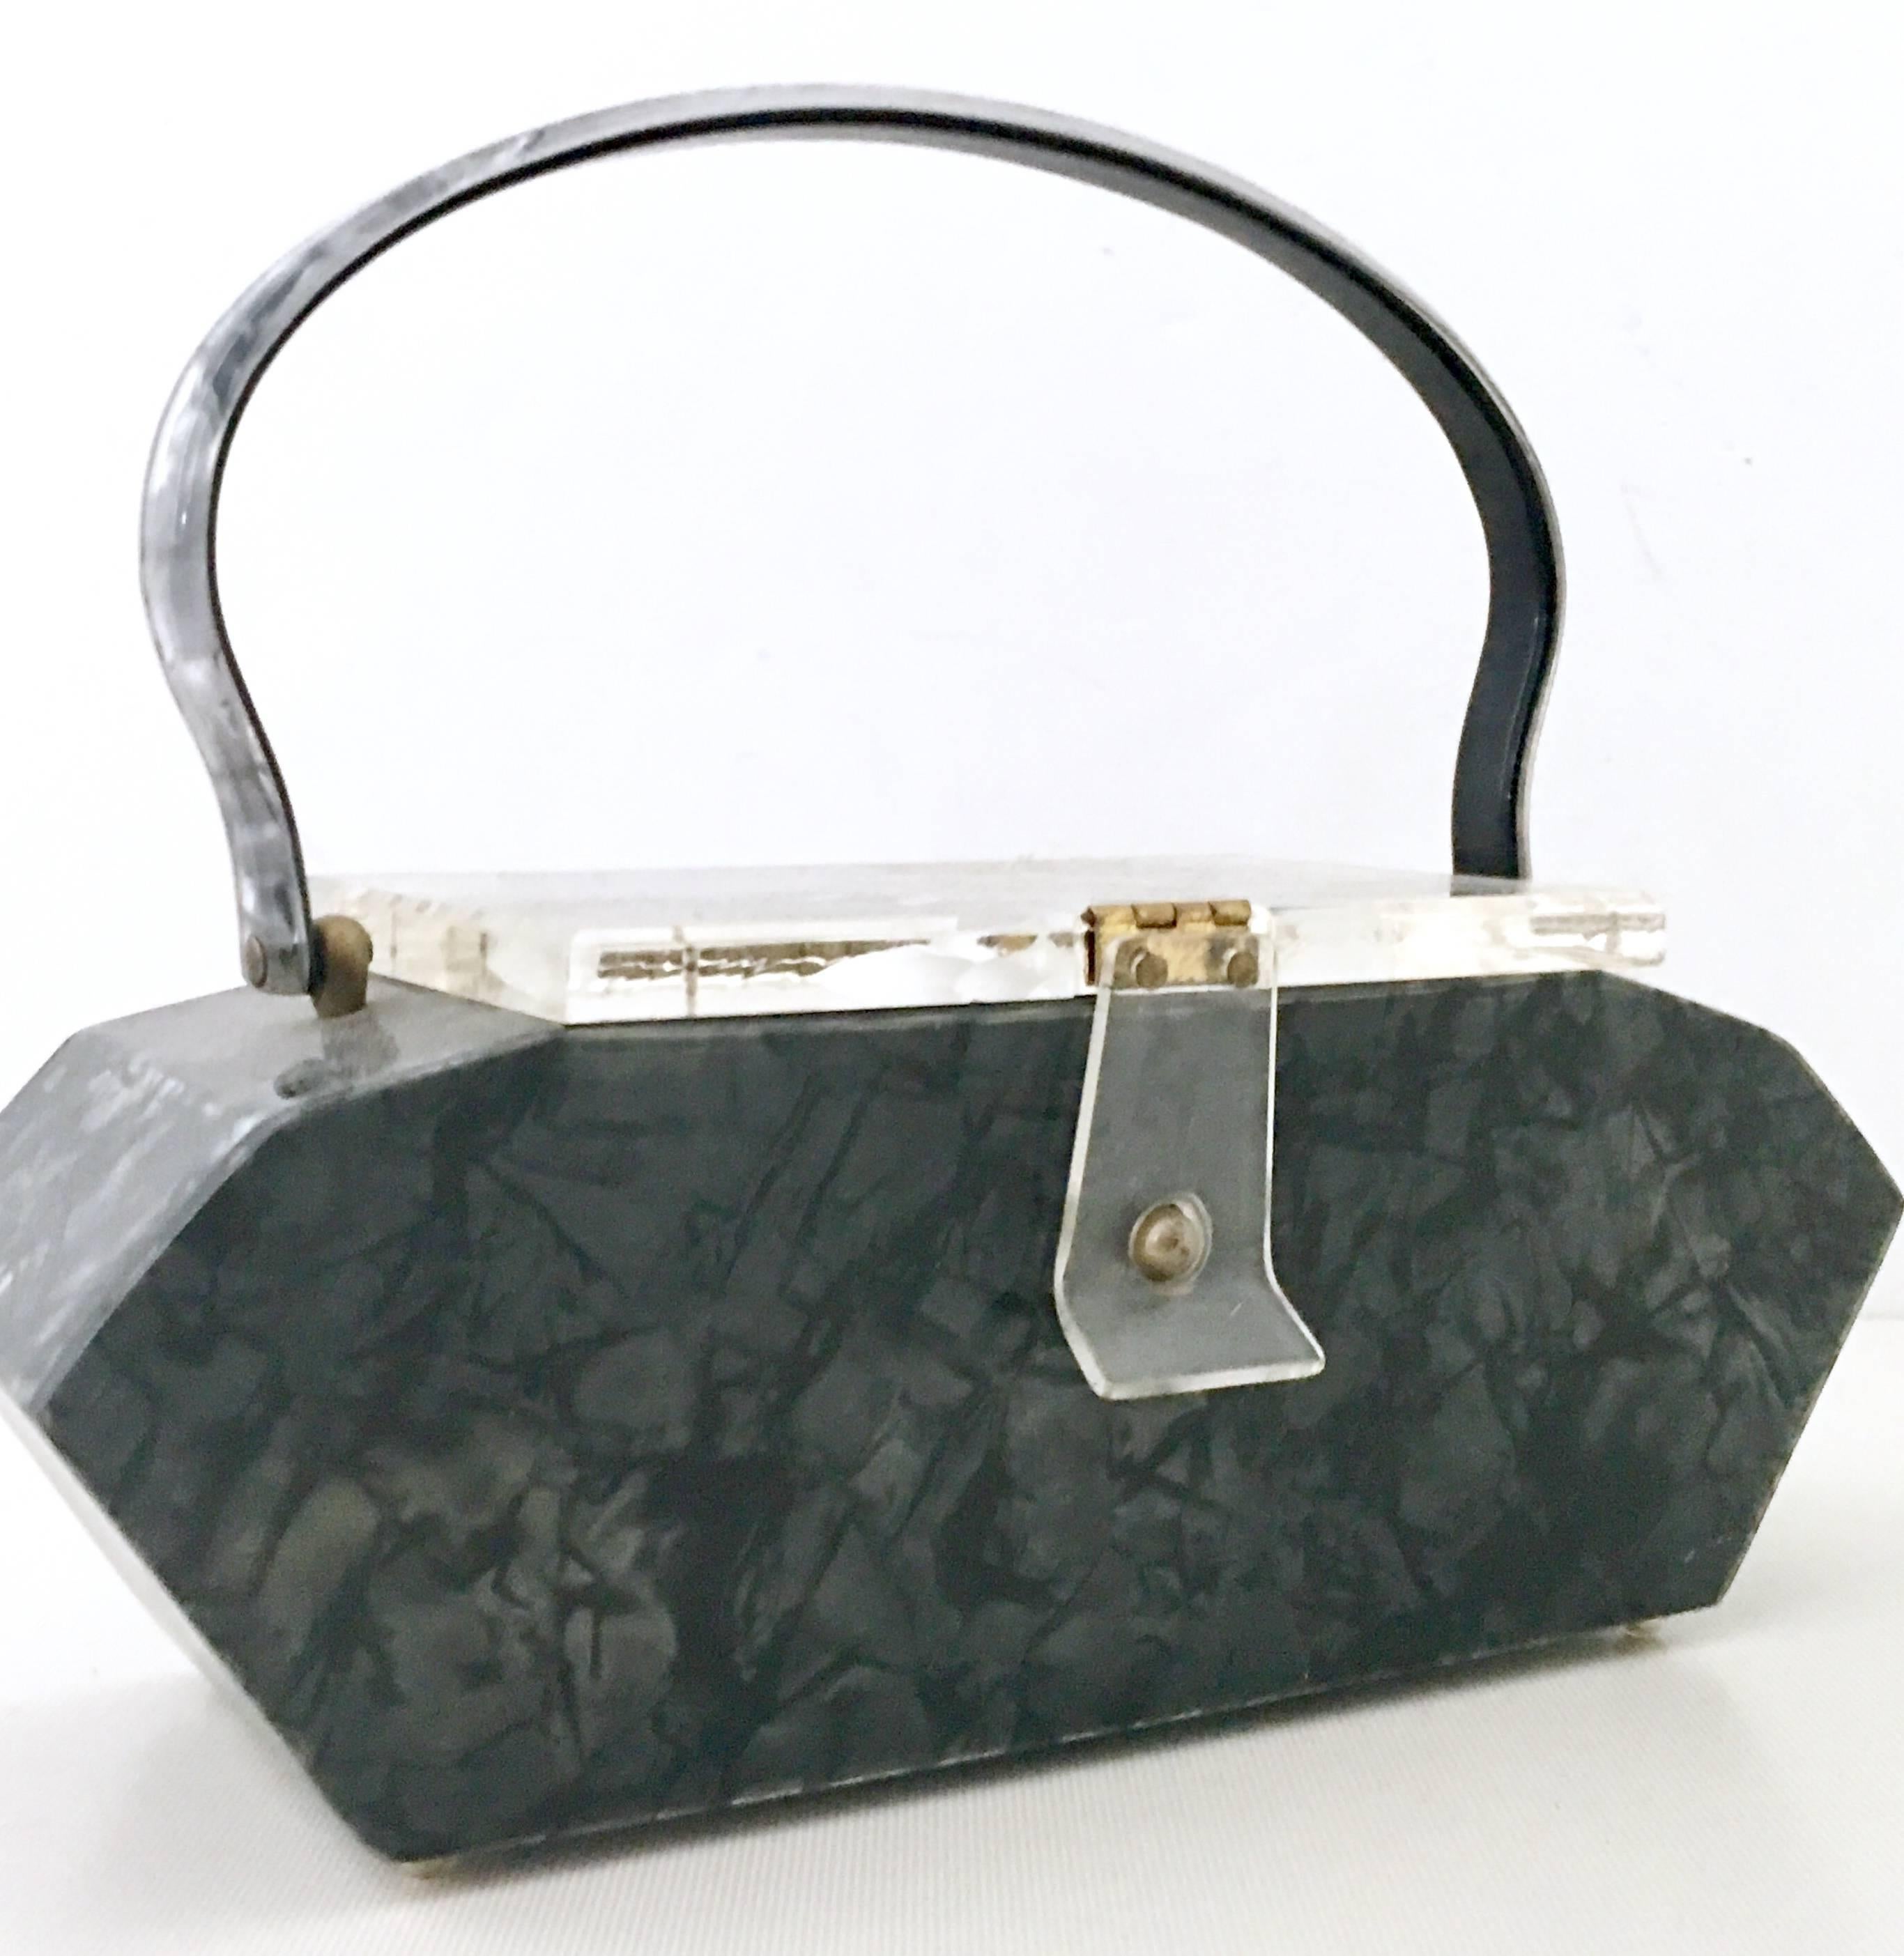 1940'S Art Deco Carved & Marbleized Gun metal Grey Lucite Box Purse By, Nelson Originals Miami Fla. This box style top hand purse features a carved floral motif transparent hinge lid with flap closure, gunmetal grey body and handle with brass